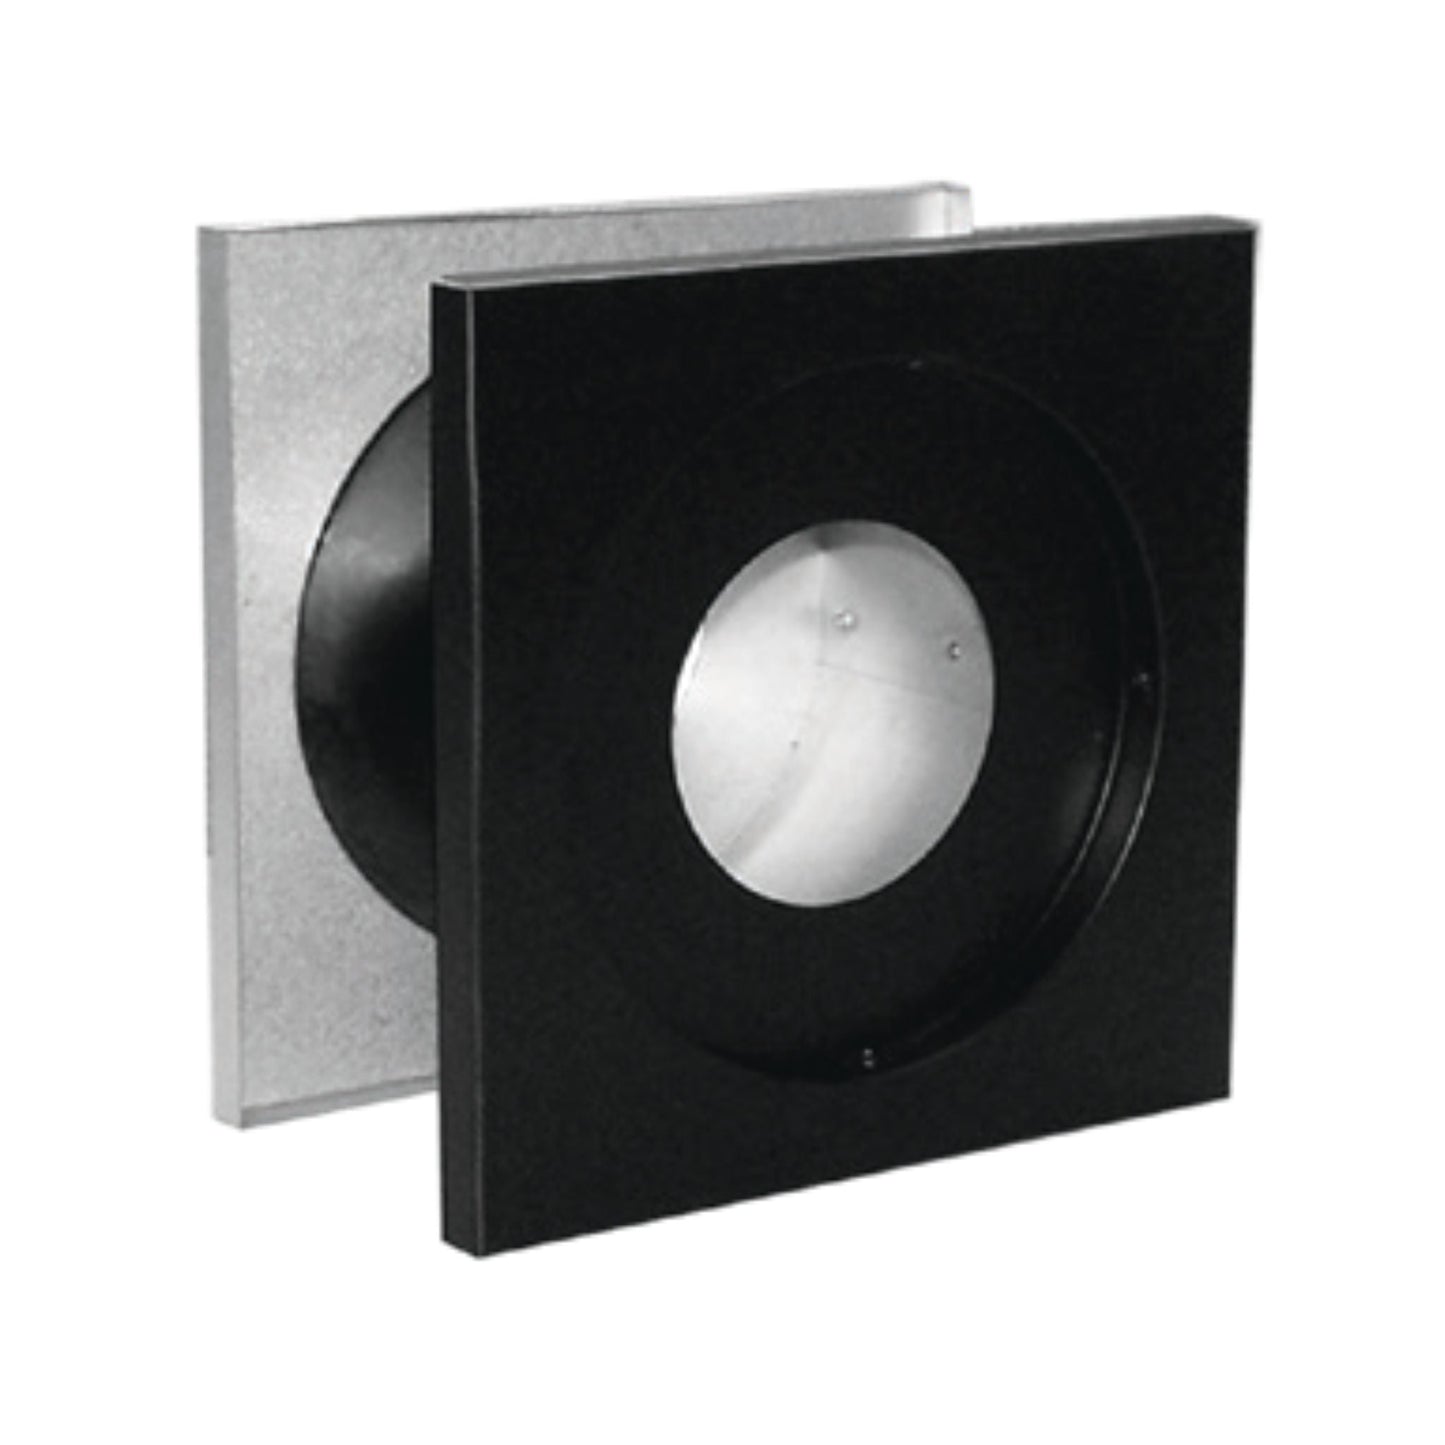 DuraVent Concentric Vent System 3" x 5" Black Wall Thimble